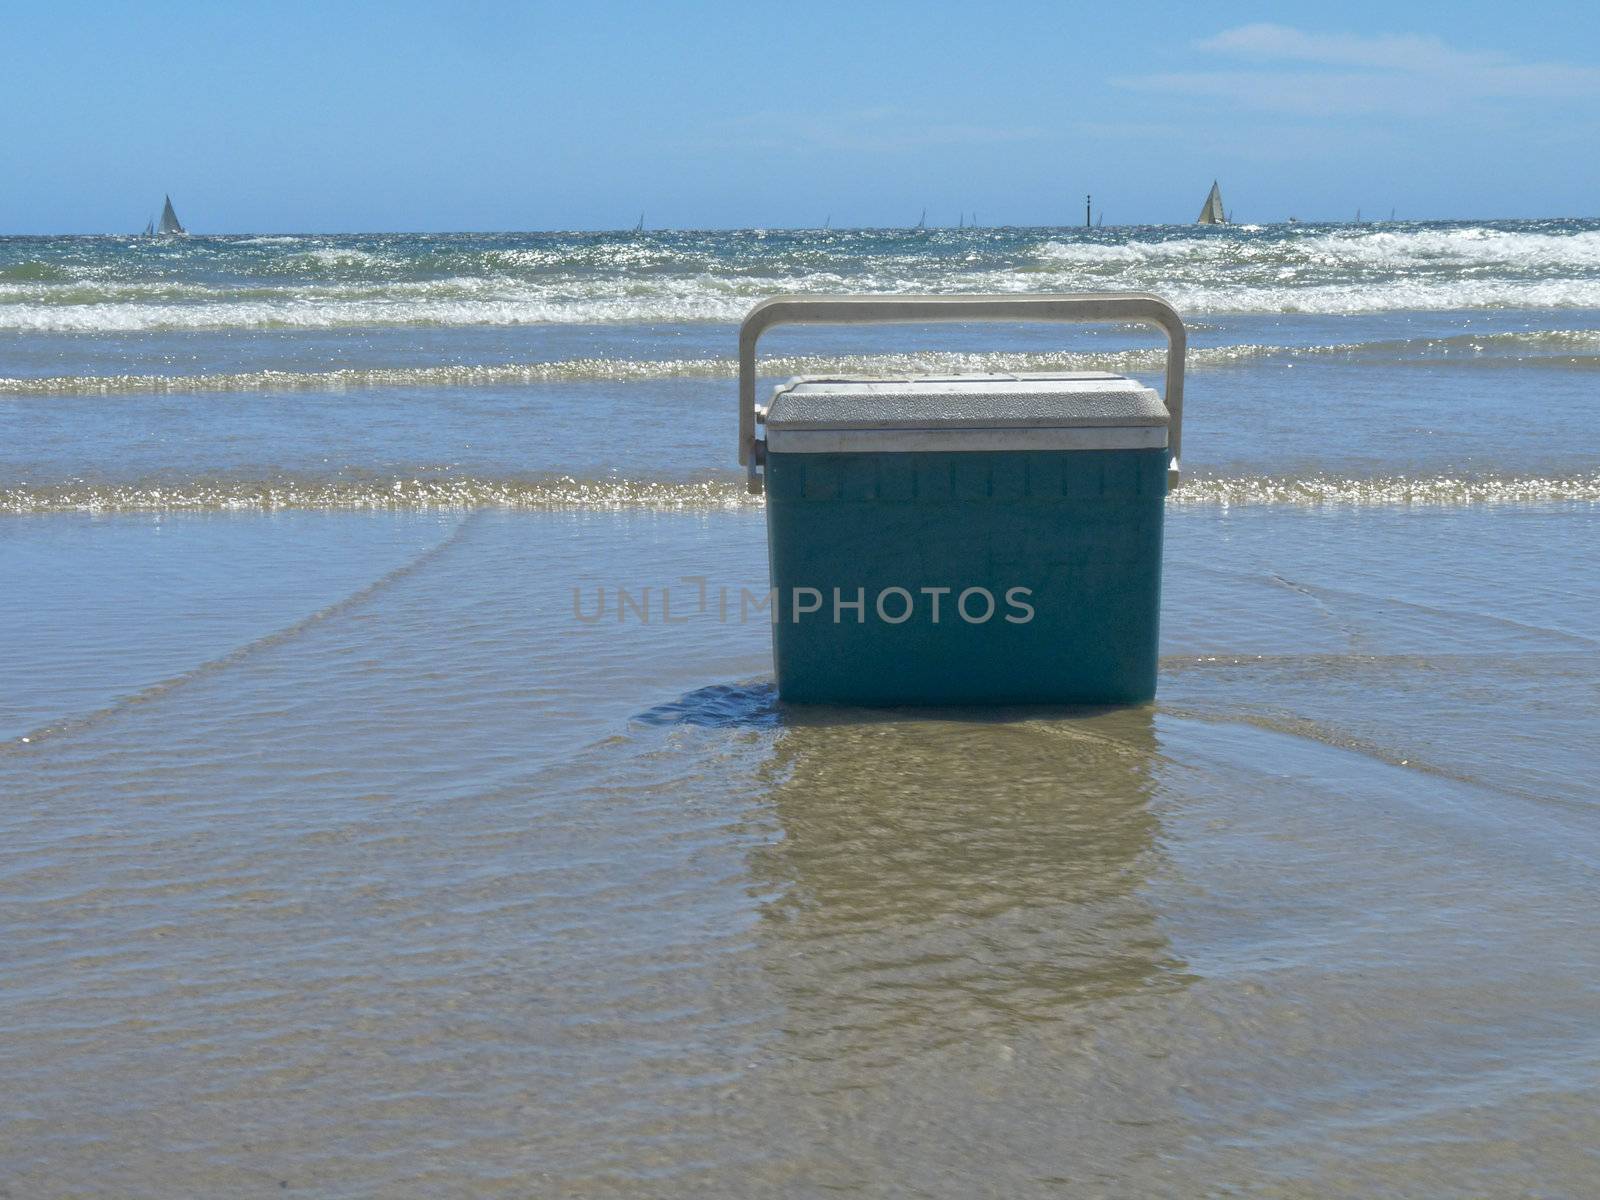 A cooler rests on the sand in the shallow water